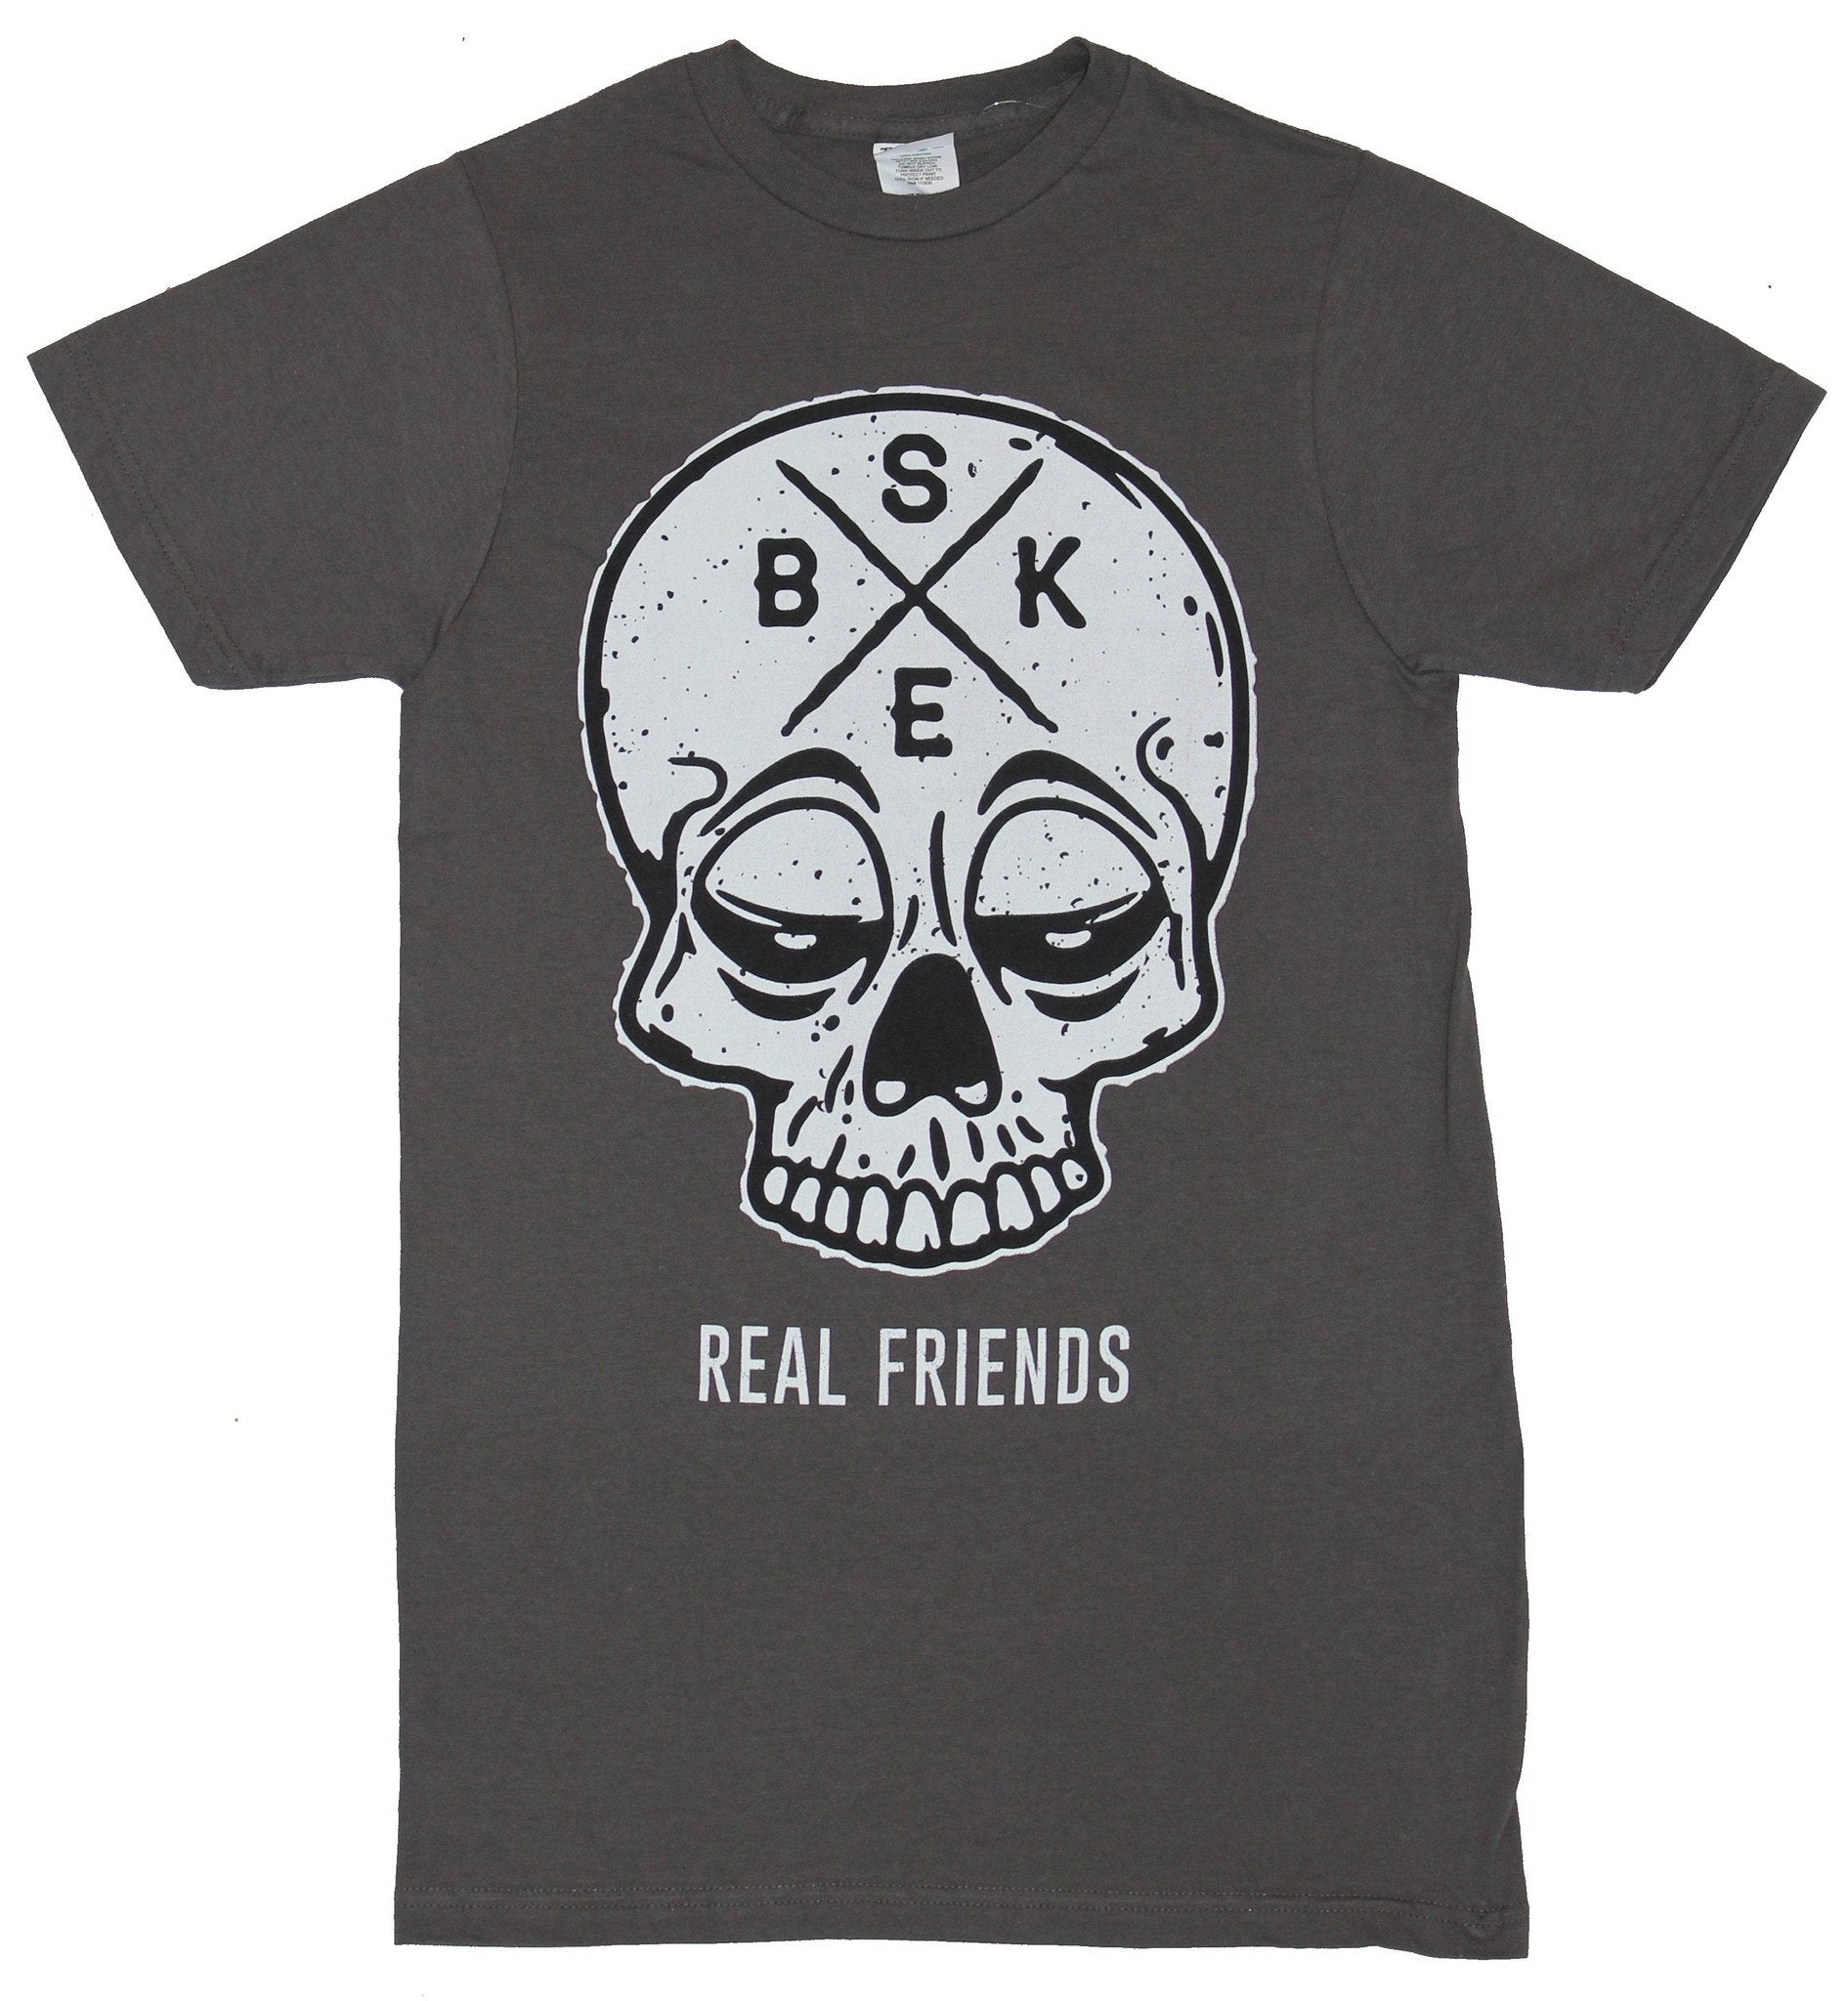 Real Friends Mens T-Shirt - BSKE Droopy Eyed Skull Image